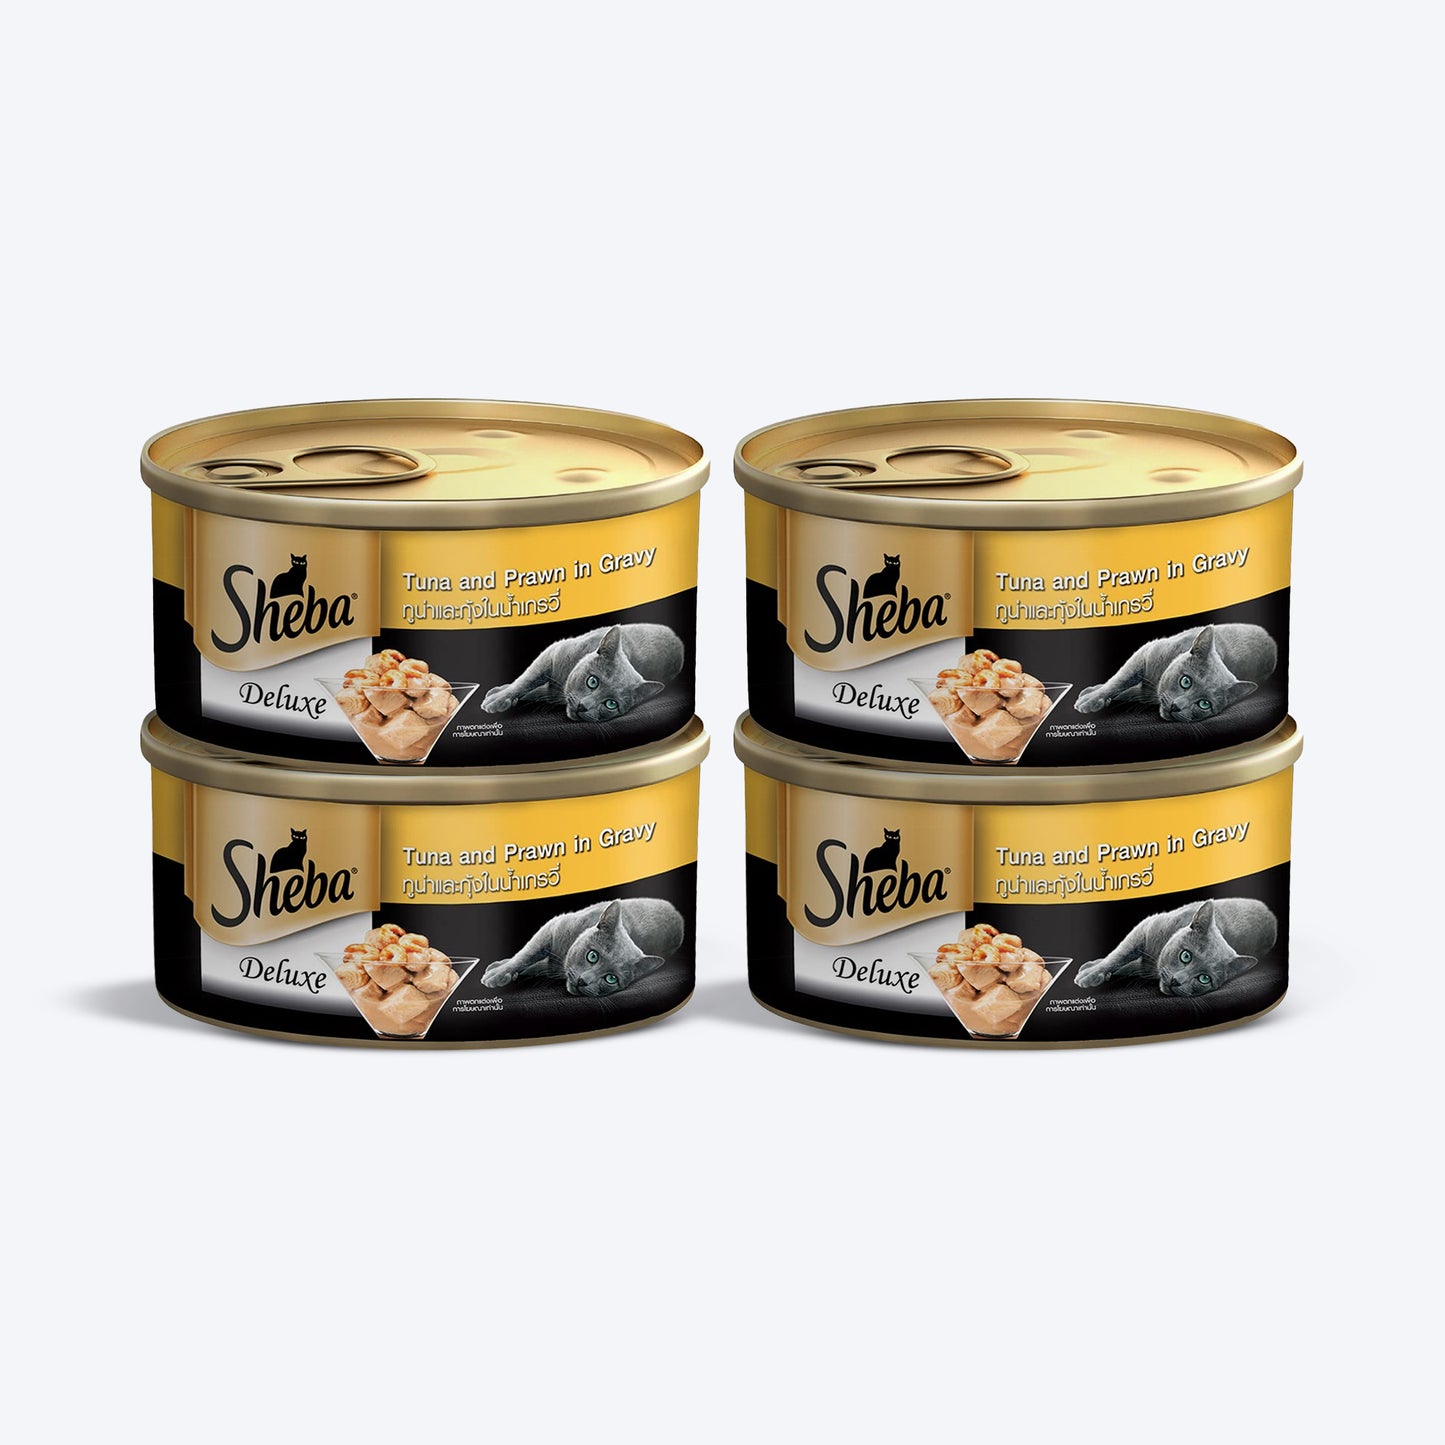 Sheba Tuna Fillets and Whole Prawns in Gravy Adult Wet Cat Food - 85 g packs - Heads Up For Tails